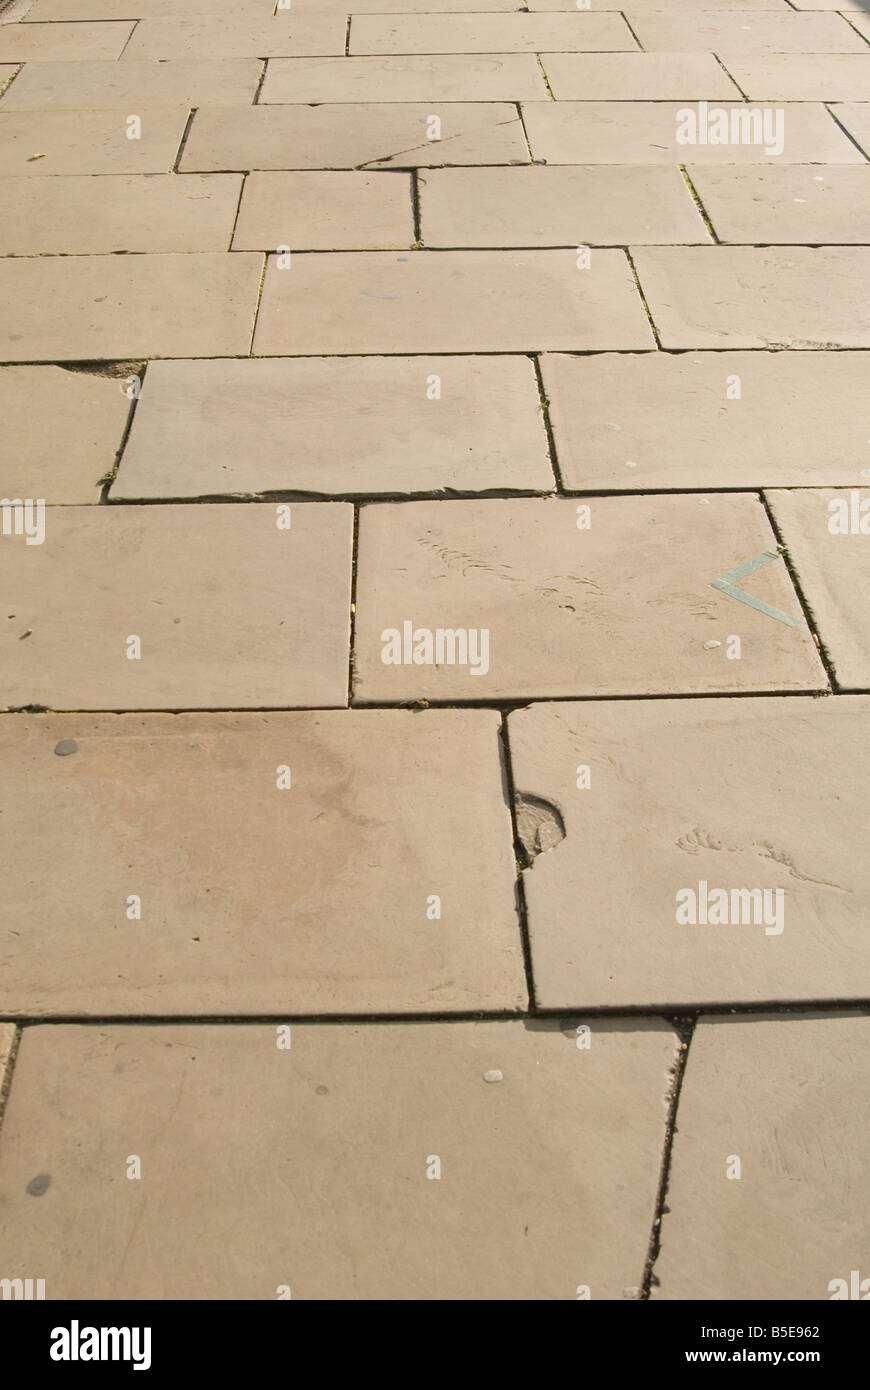 An image of paving slabs on a pathway or sidewalk the paving slabs fill the image Stock Photo